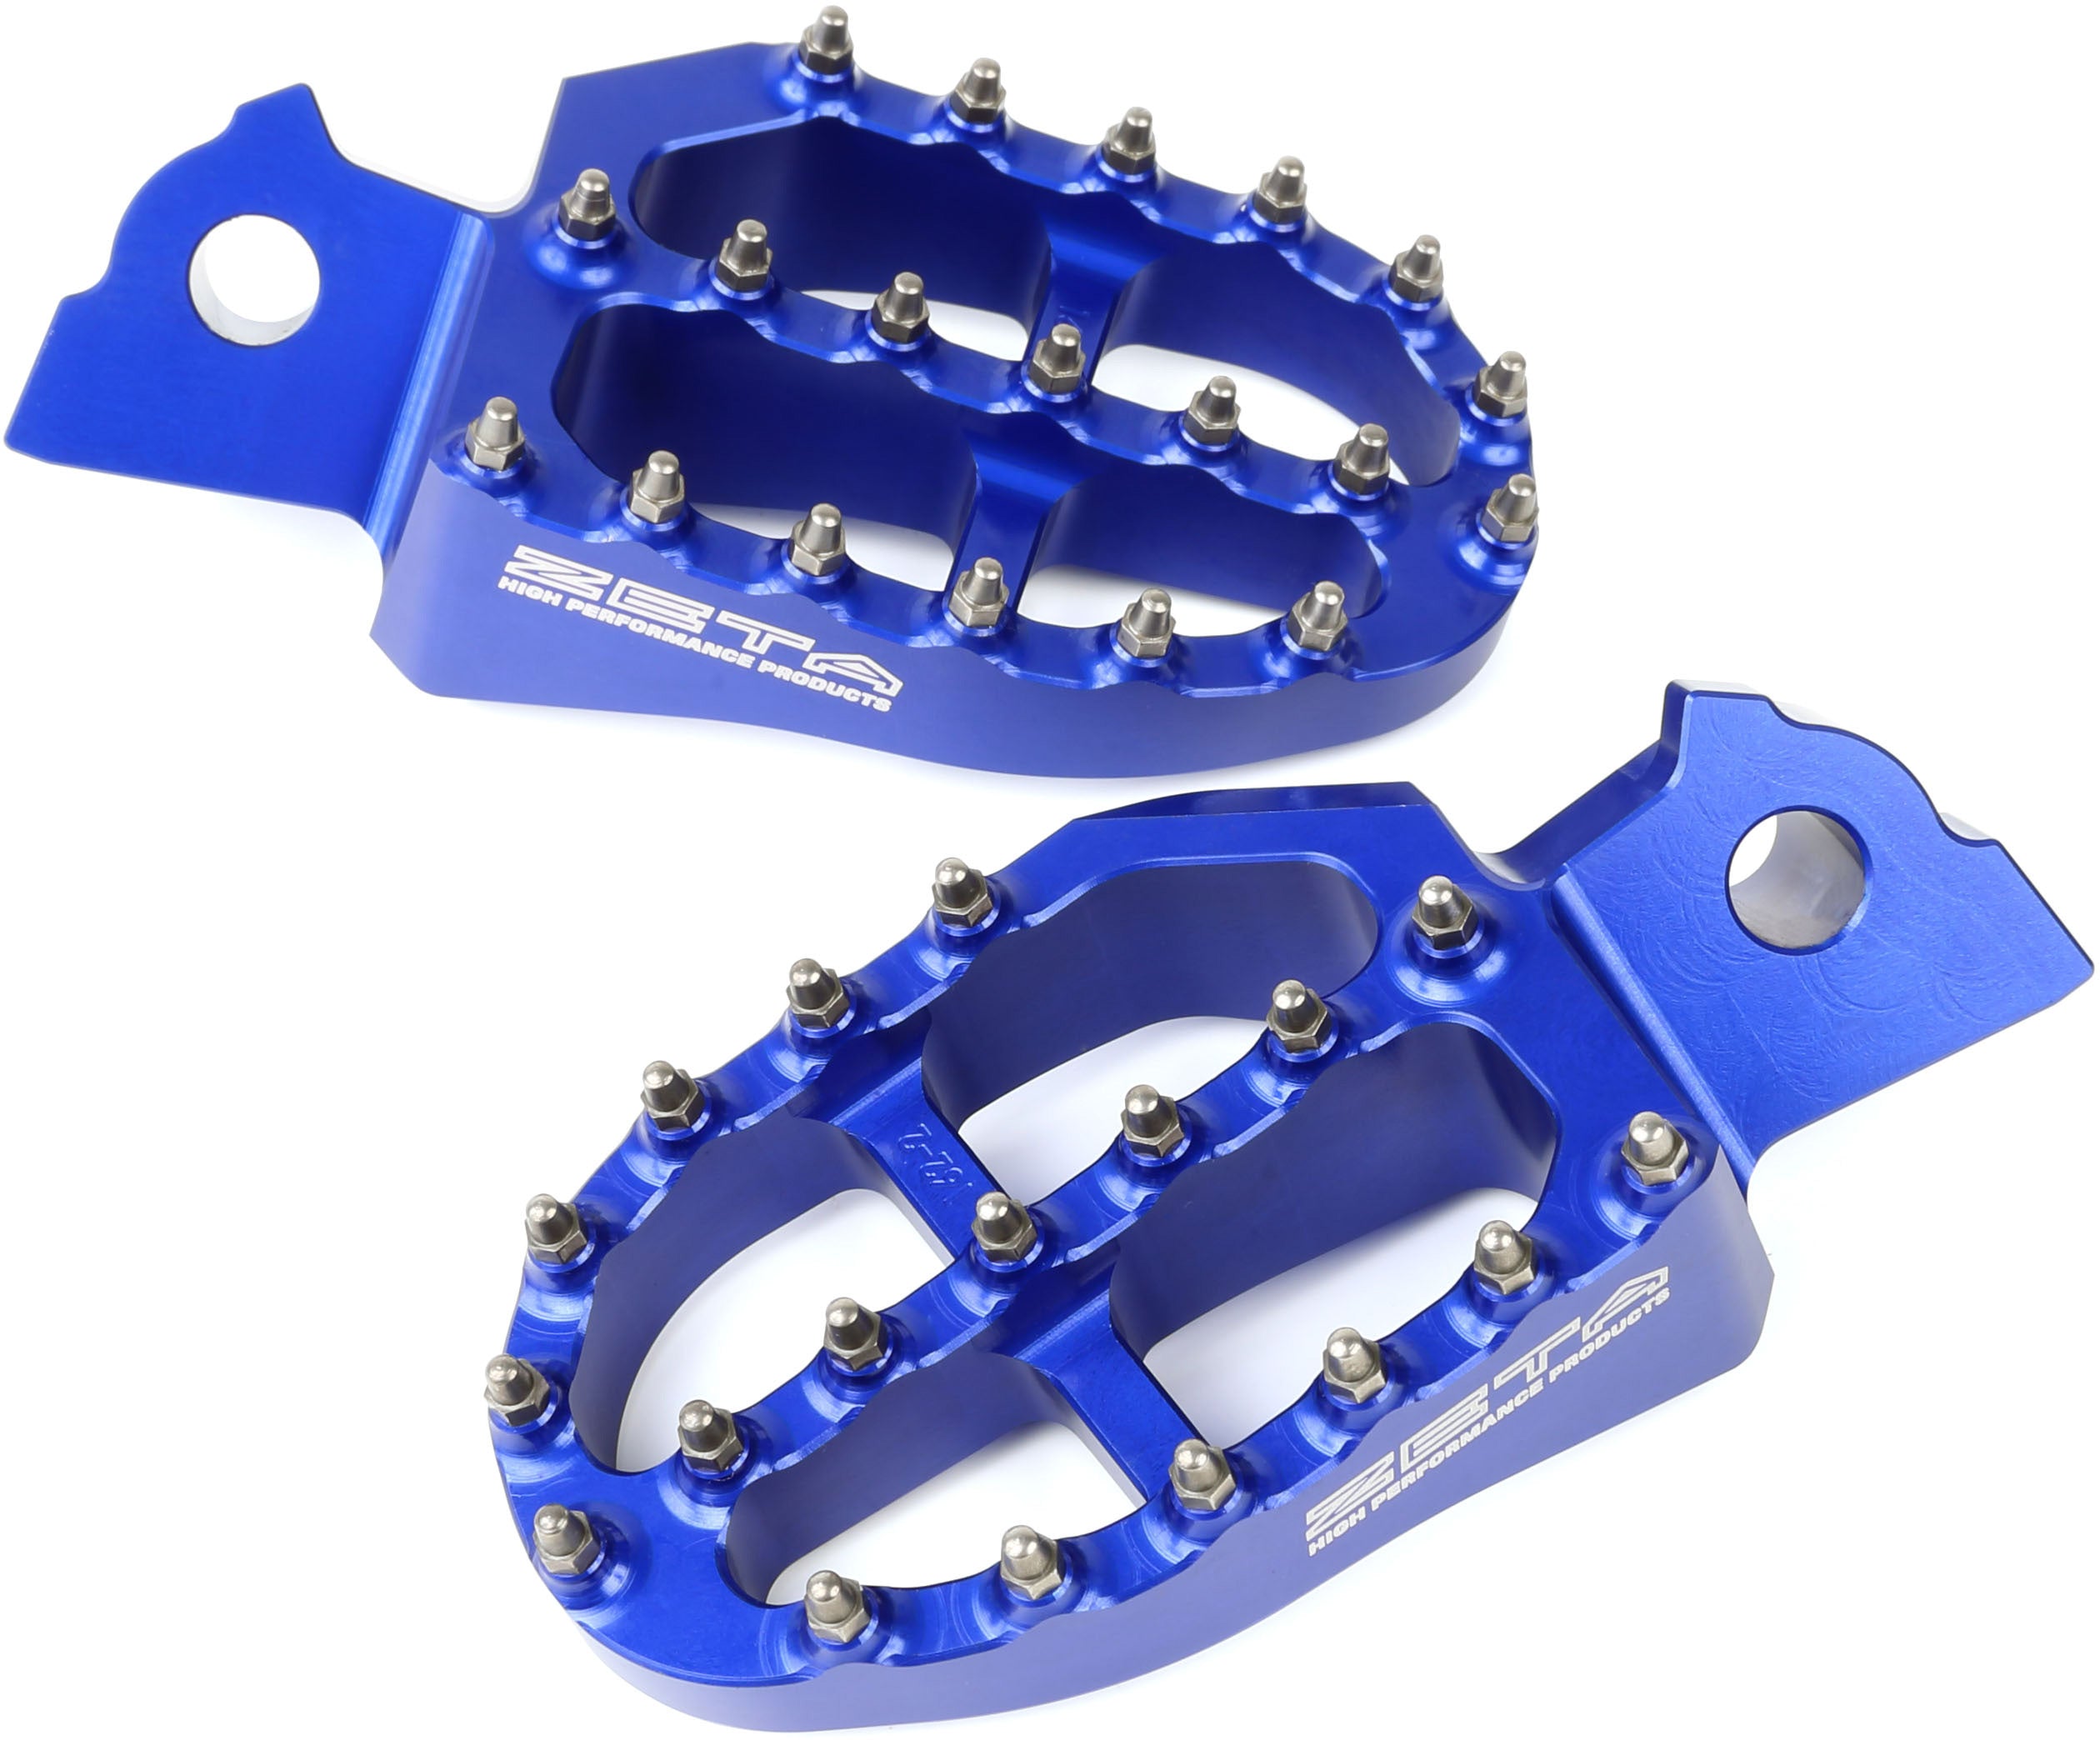 Blue Aluminum Foot Pegs for YZF250/450, WR250/450, YZ65/85, YZ125/250 Motorcycles